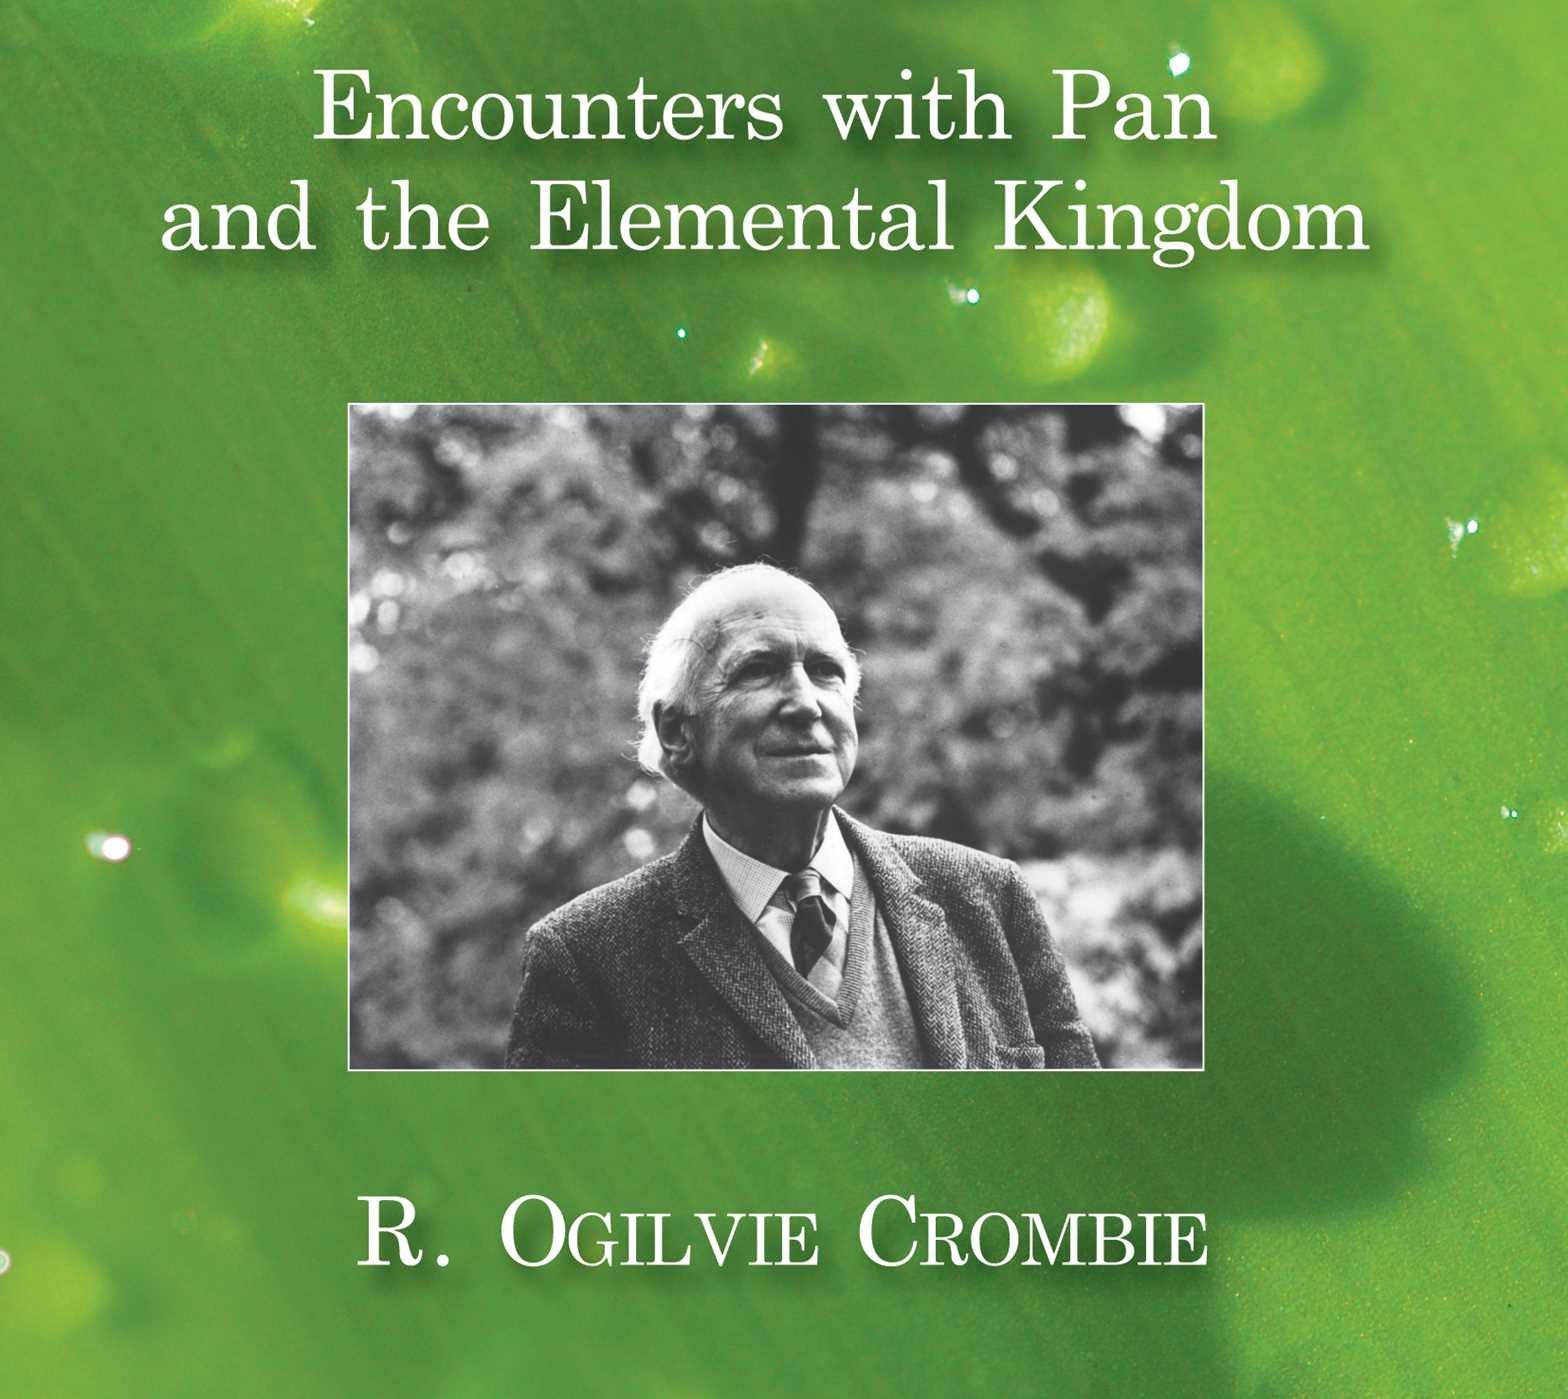 CD: Encounters with Pan and the Elemental Kingdom